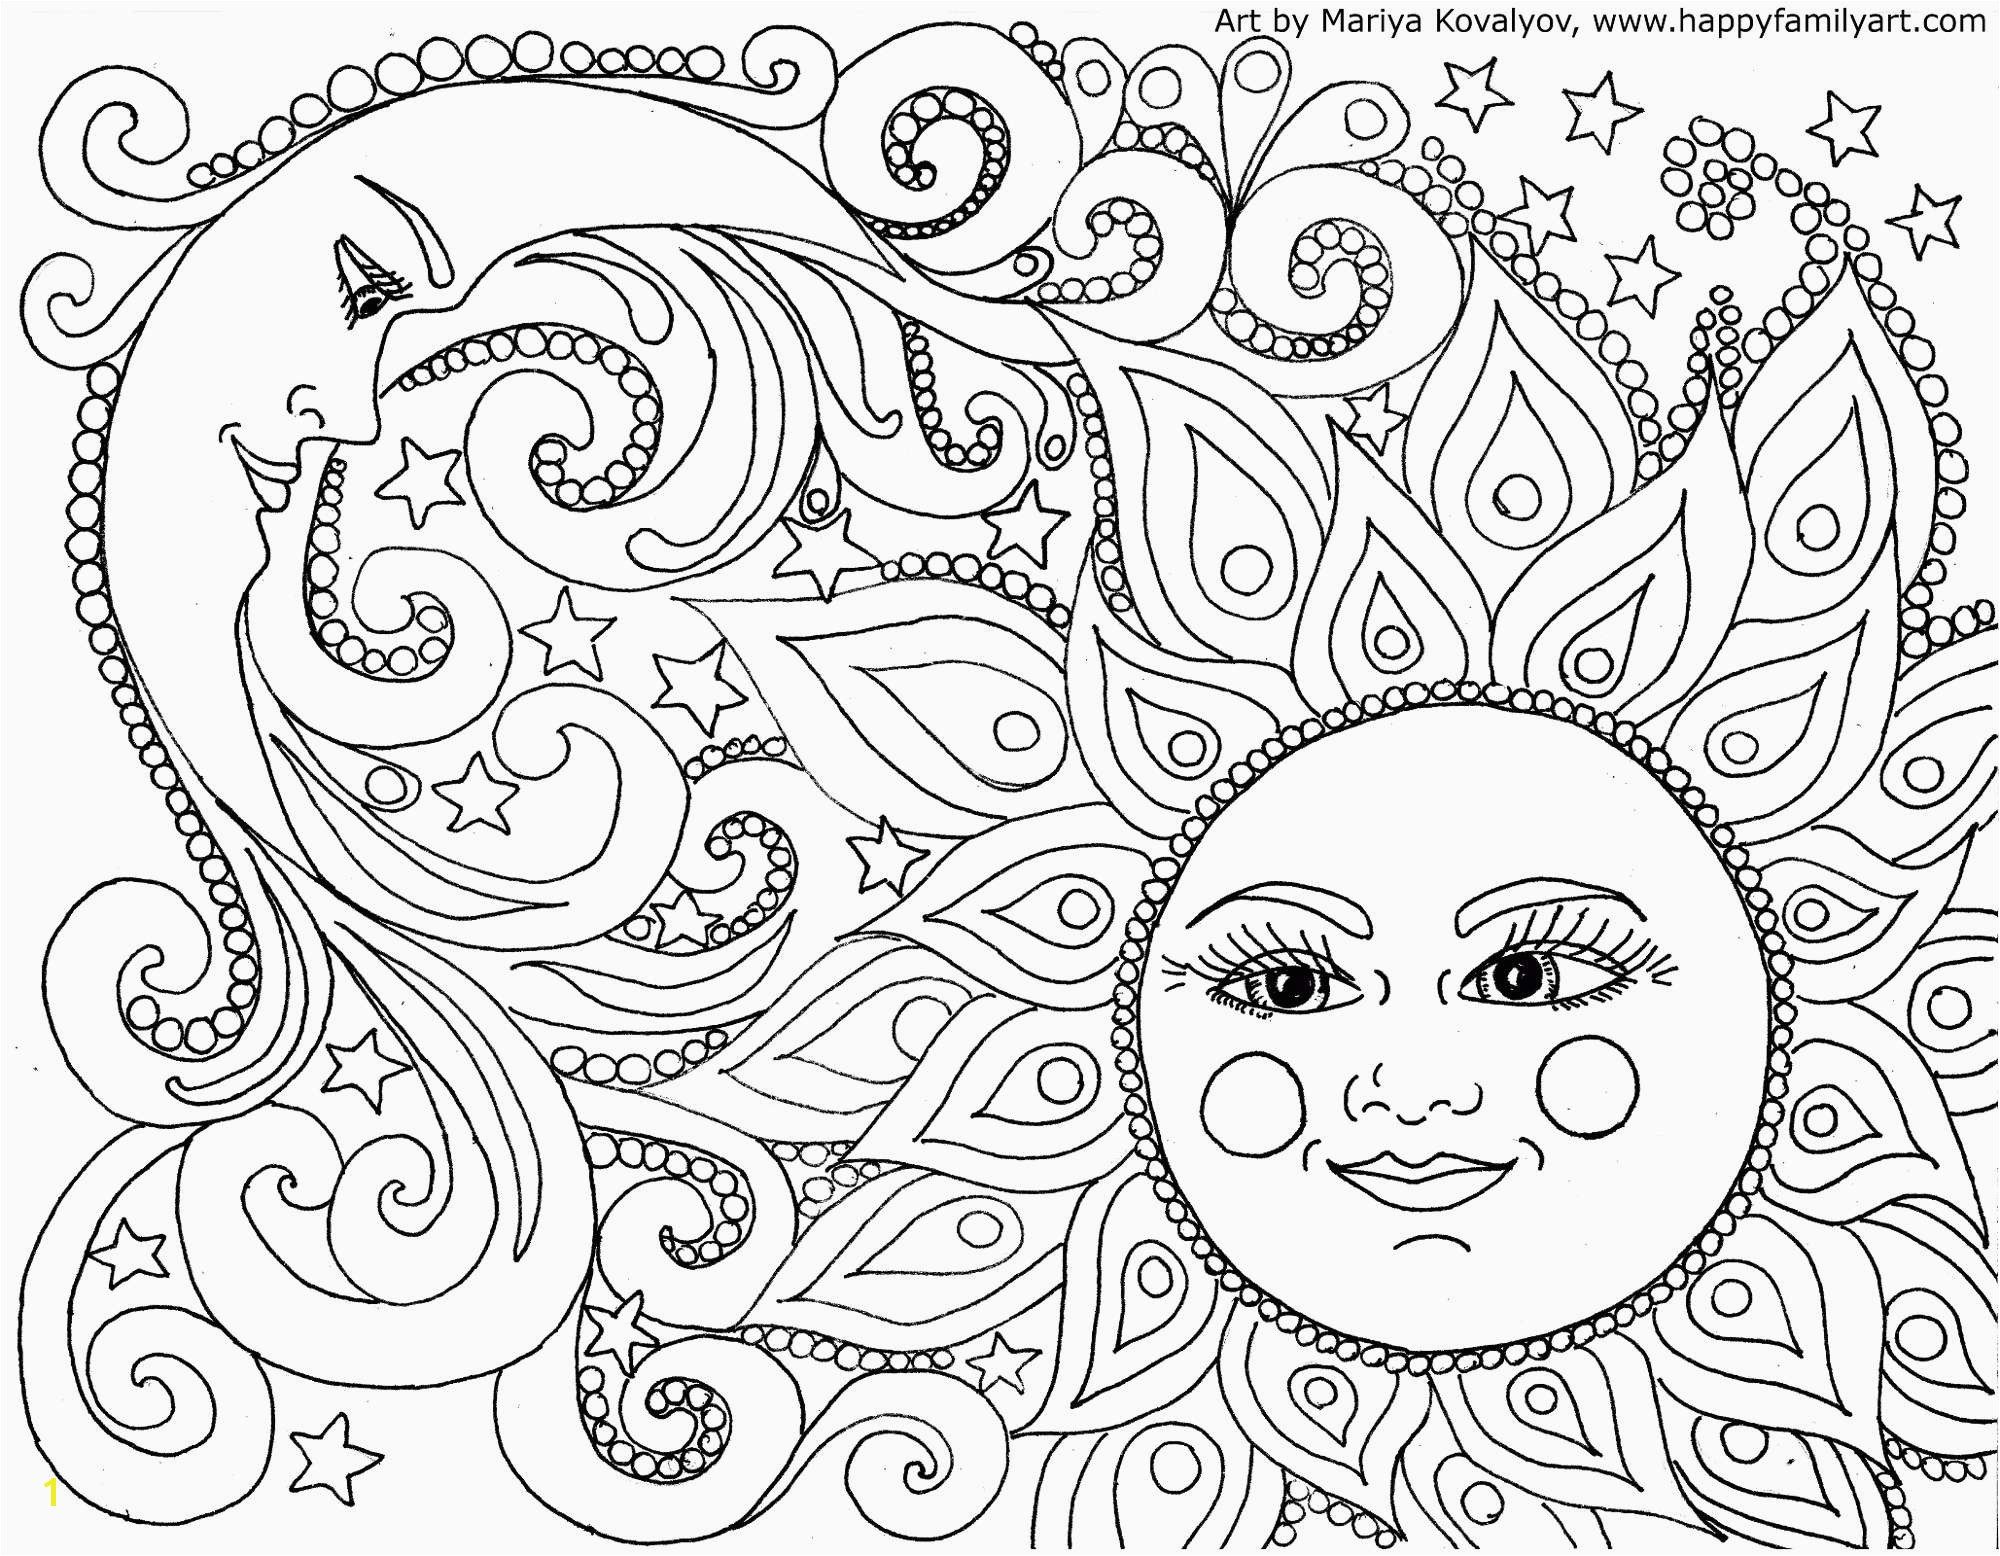 Christma Coloring Pages Coloring Pages for Christmas Time Elegant Christmas Coloring In